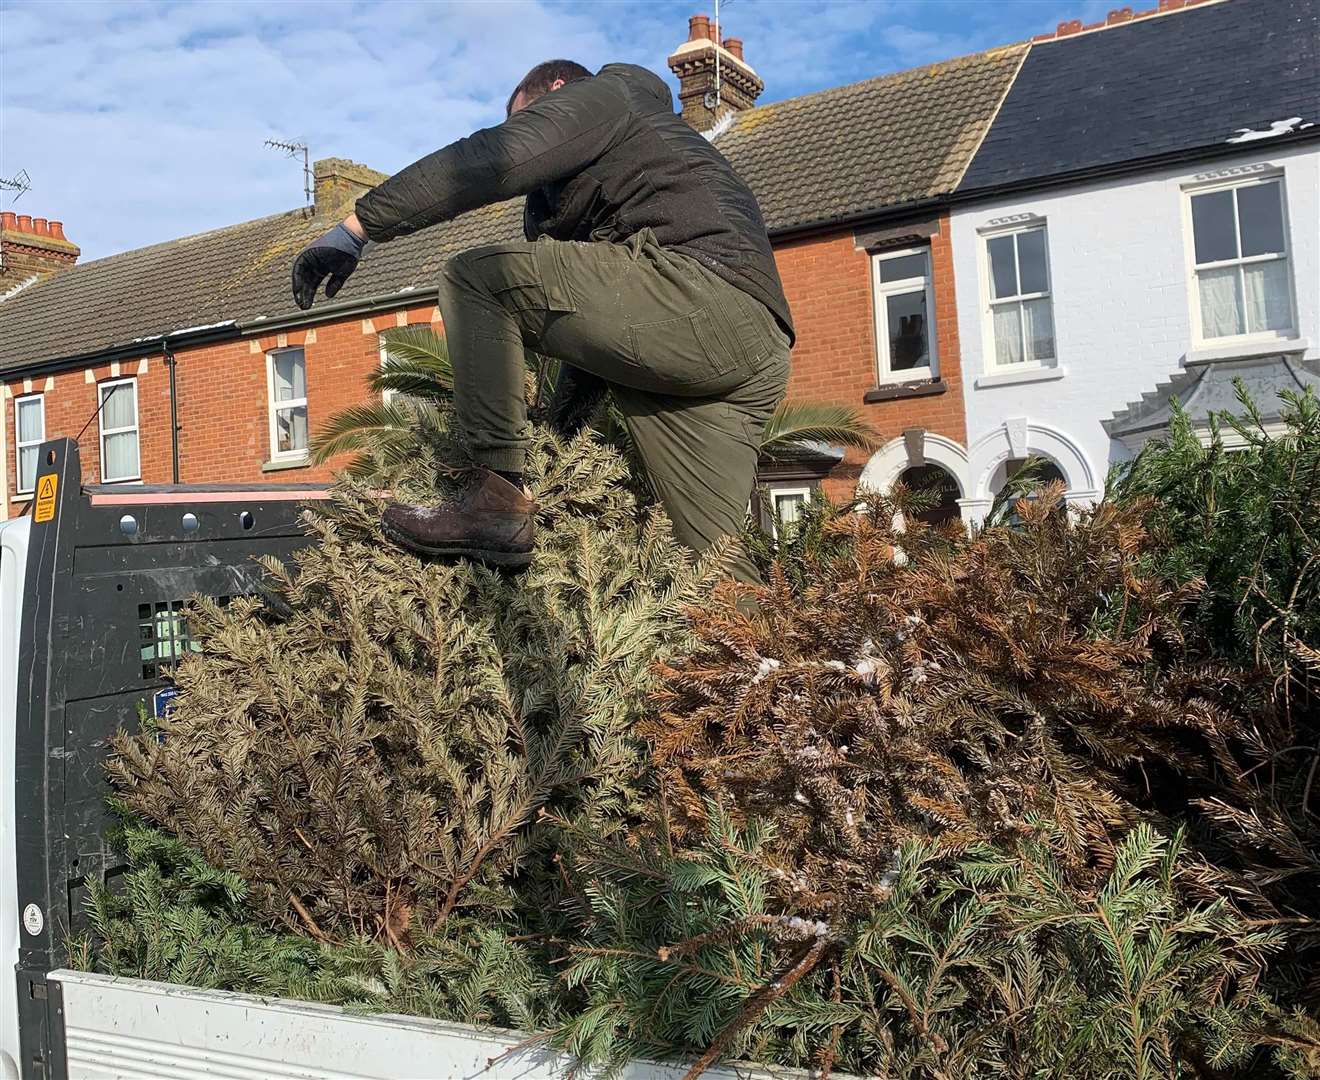 About 200 Christmas trees were removed from the streets of Whitstable. Picture: Chris Cornell